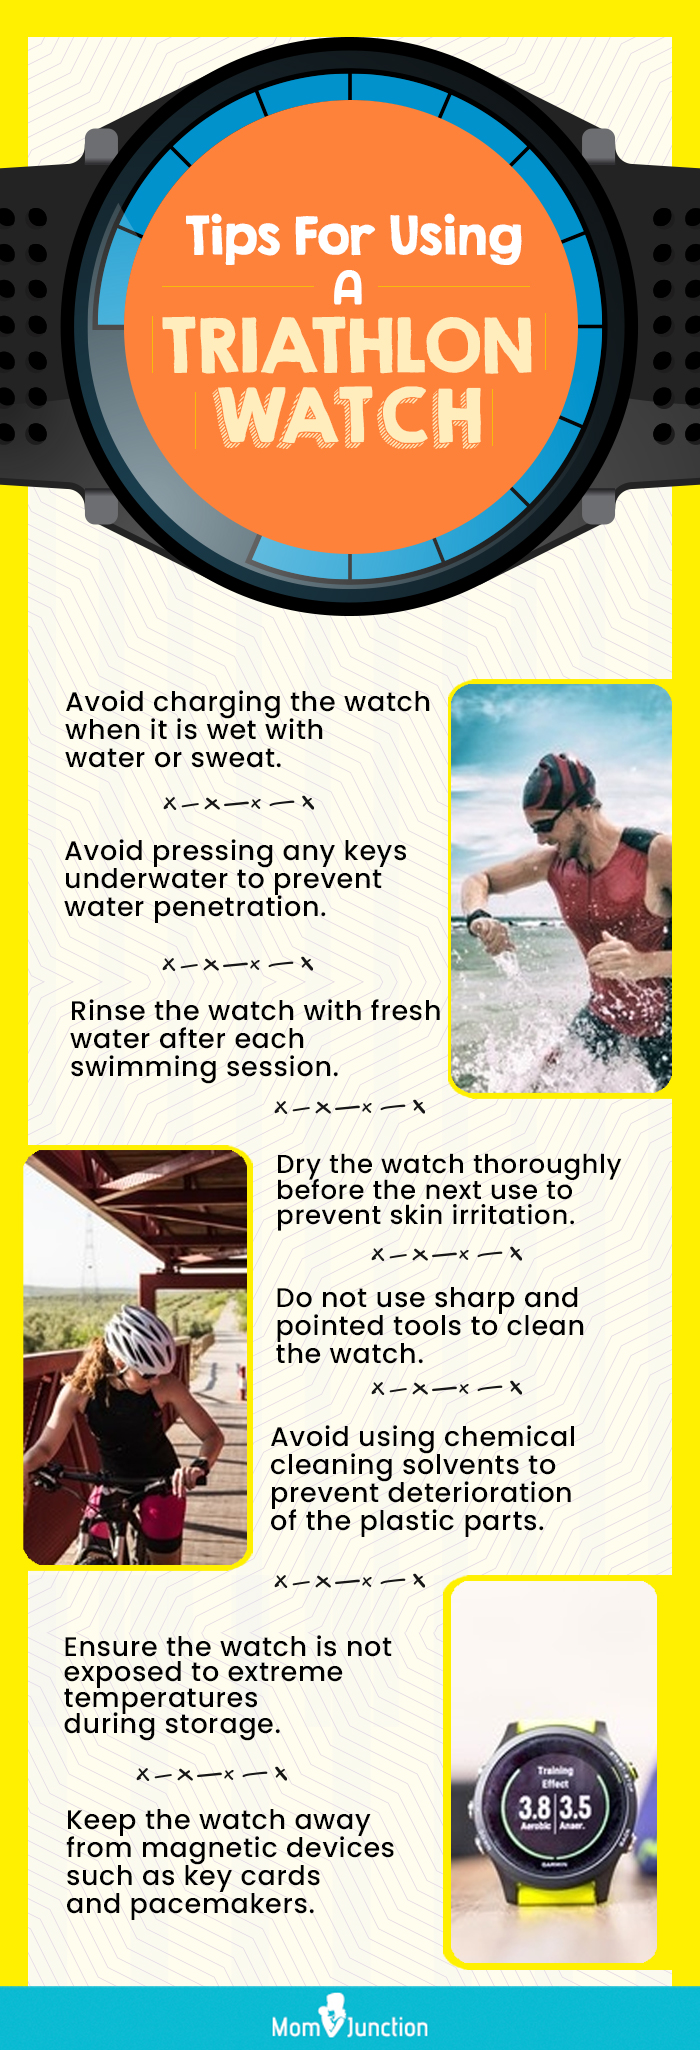 Tips For Using A Triathlon Watch (infographic)